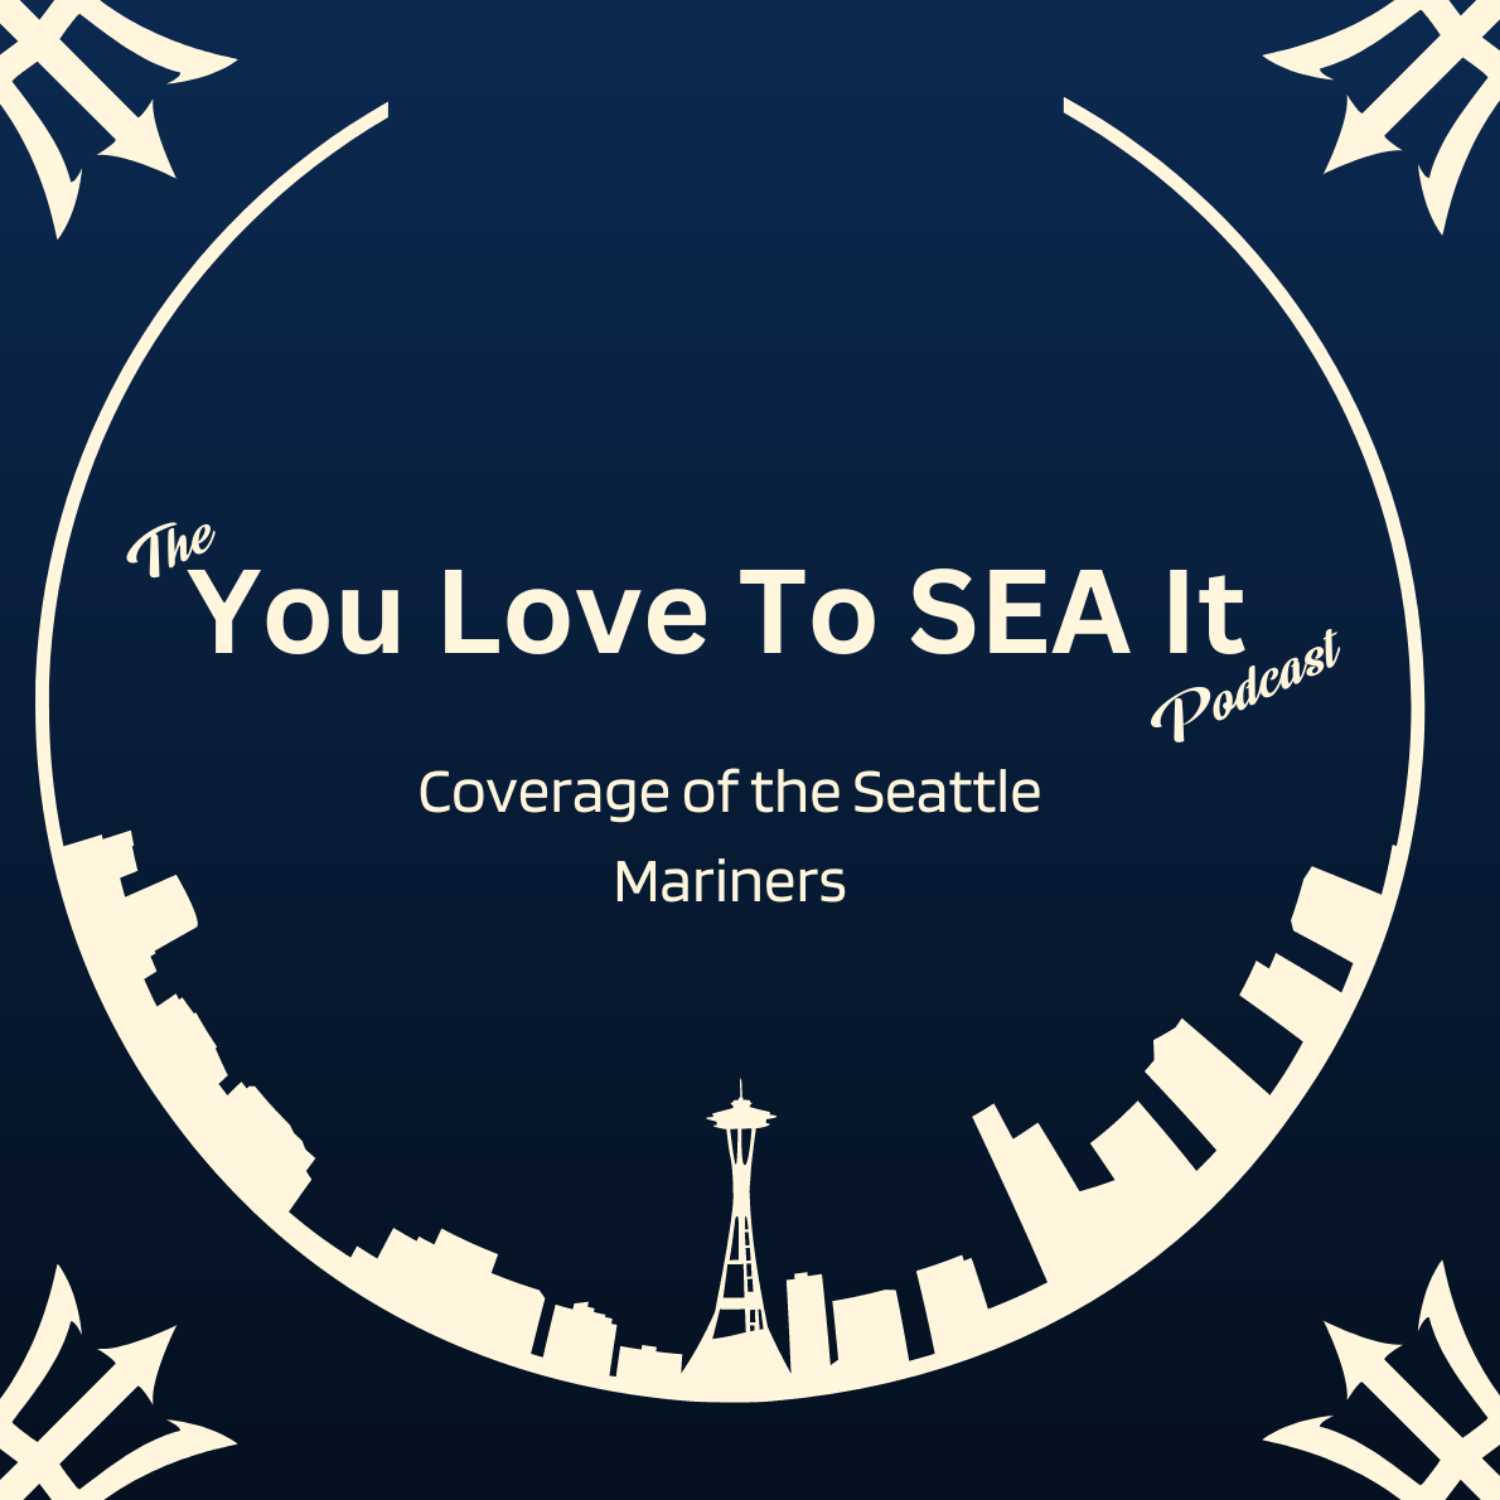 The You Love To SEA It Podcast